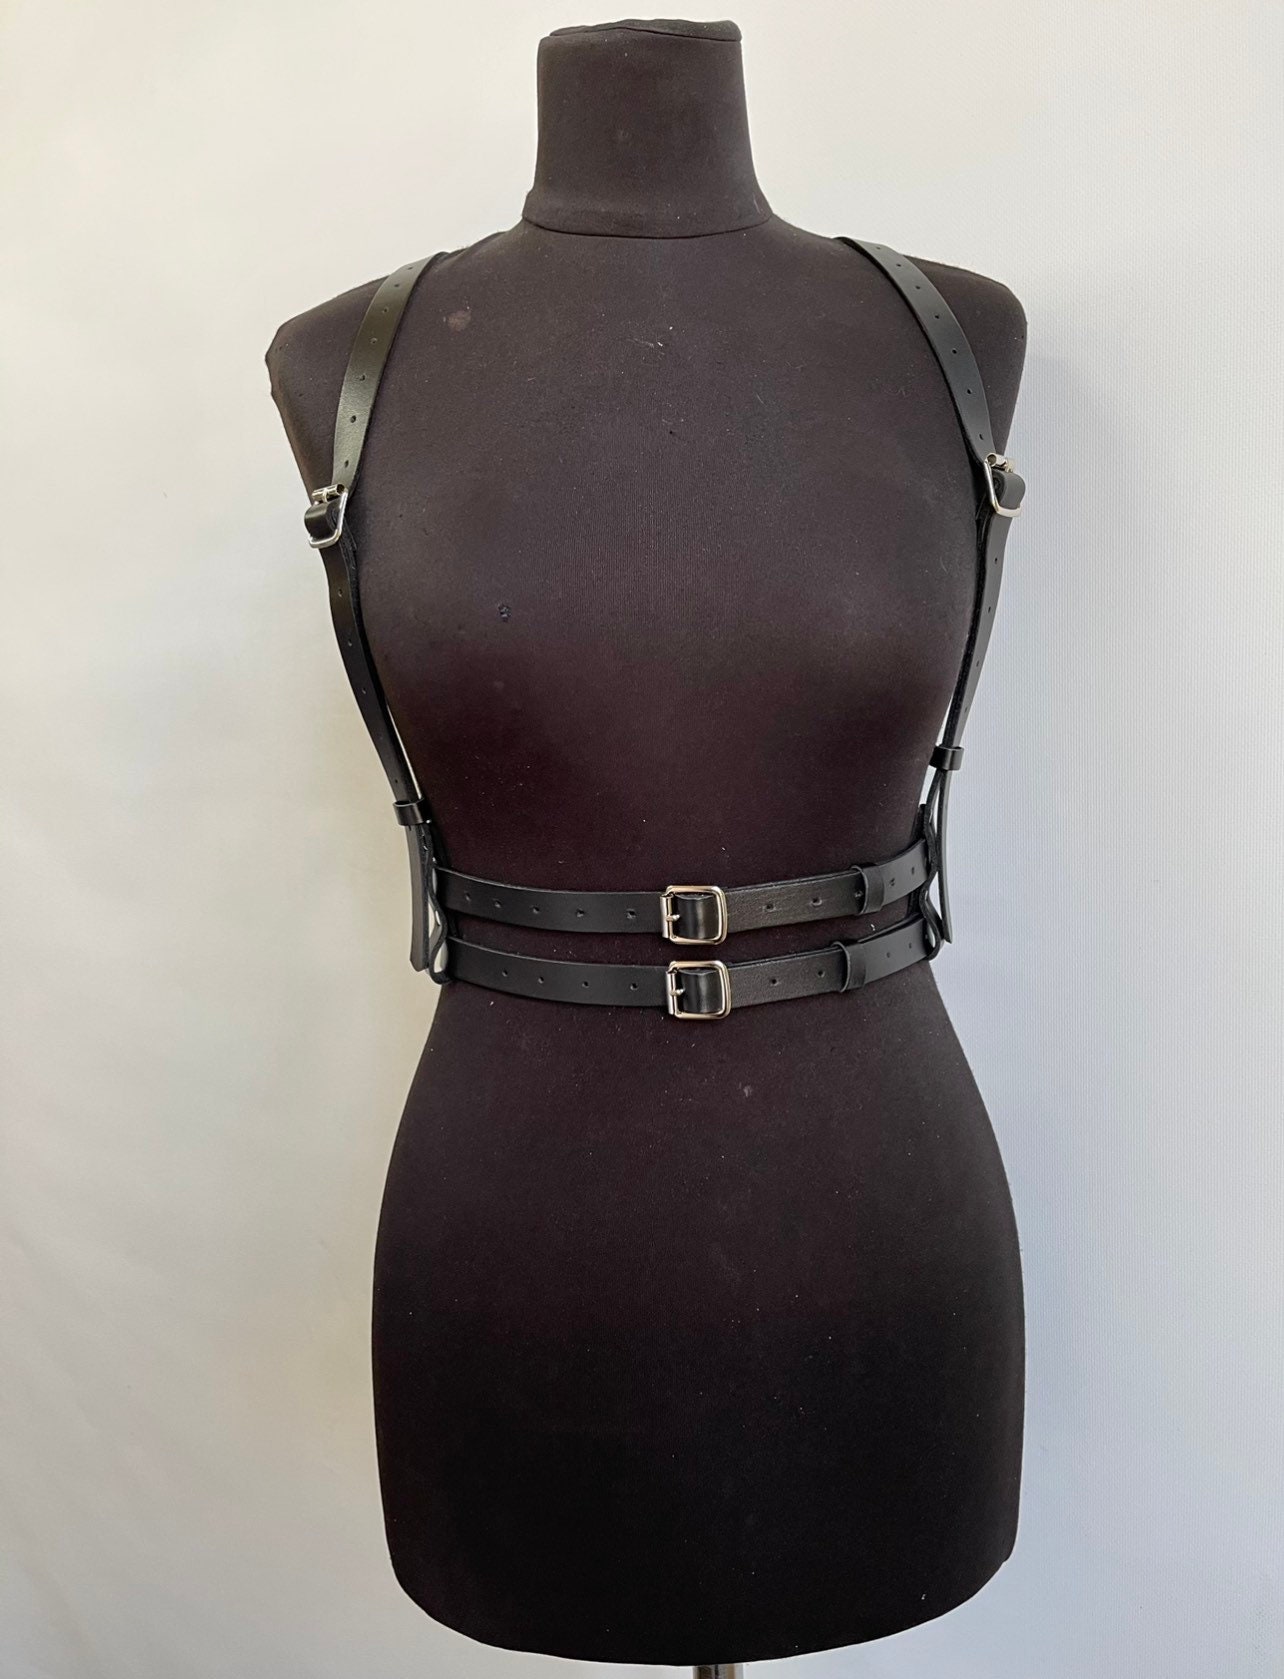 Modular Chest Harness faux leather